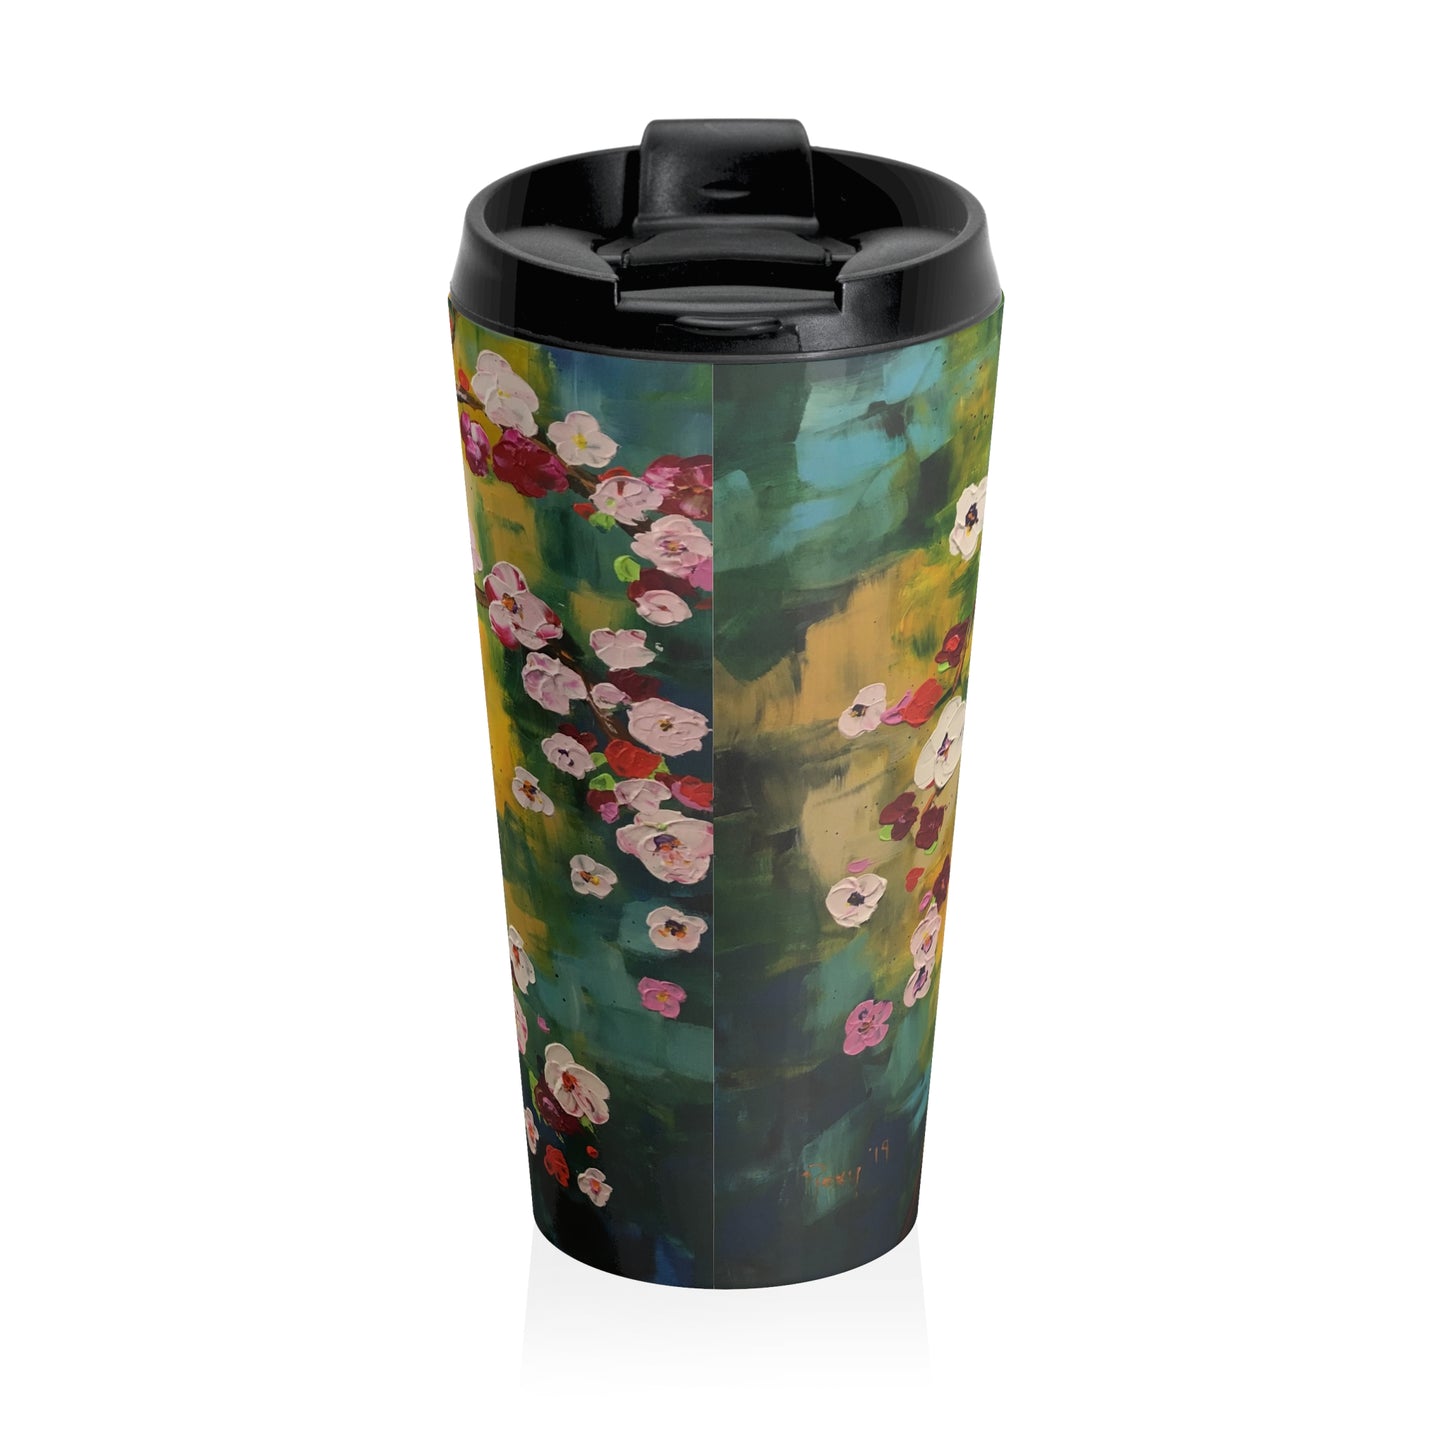 Abstract Cherry Blossoms Stainless Steel Travel Mug